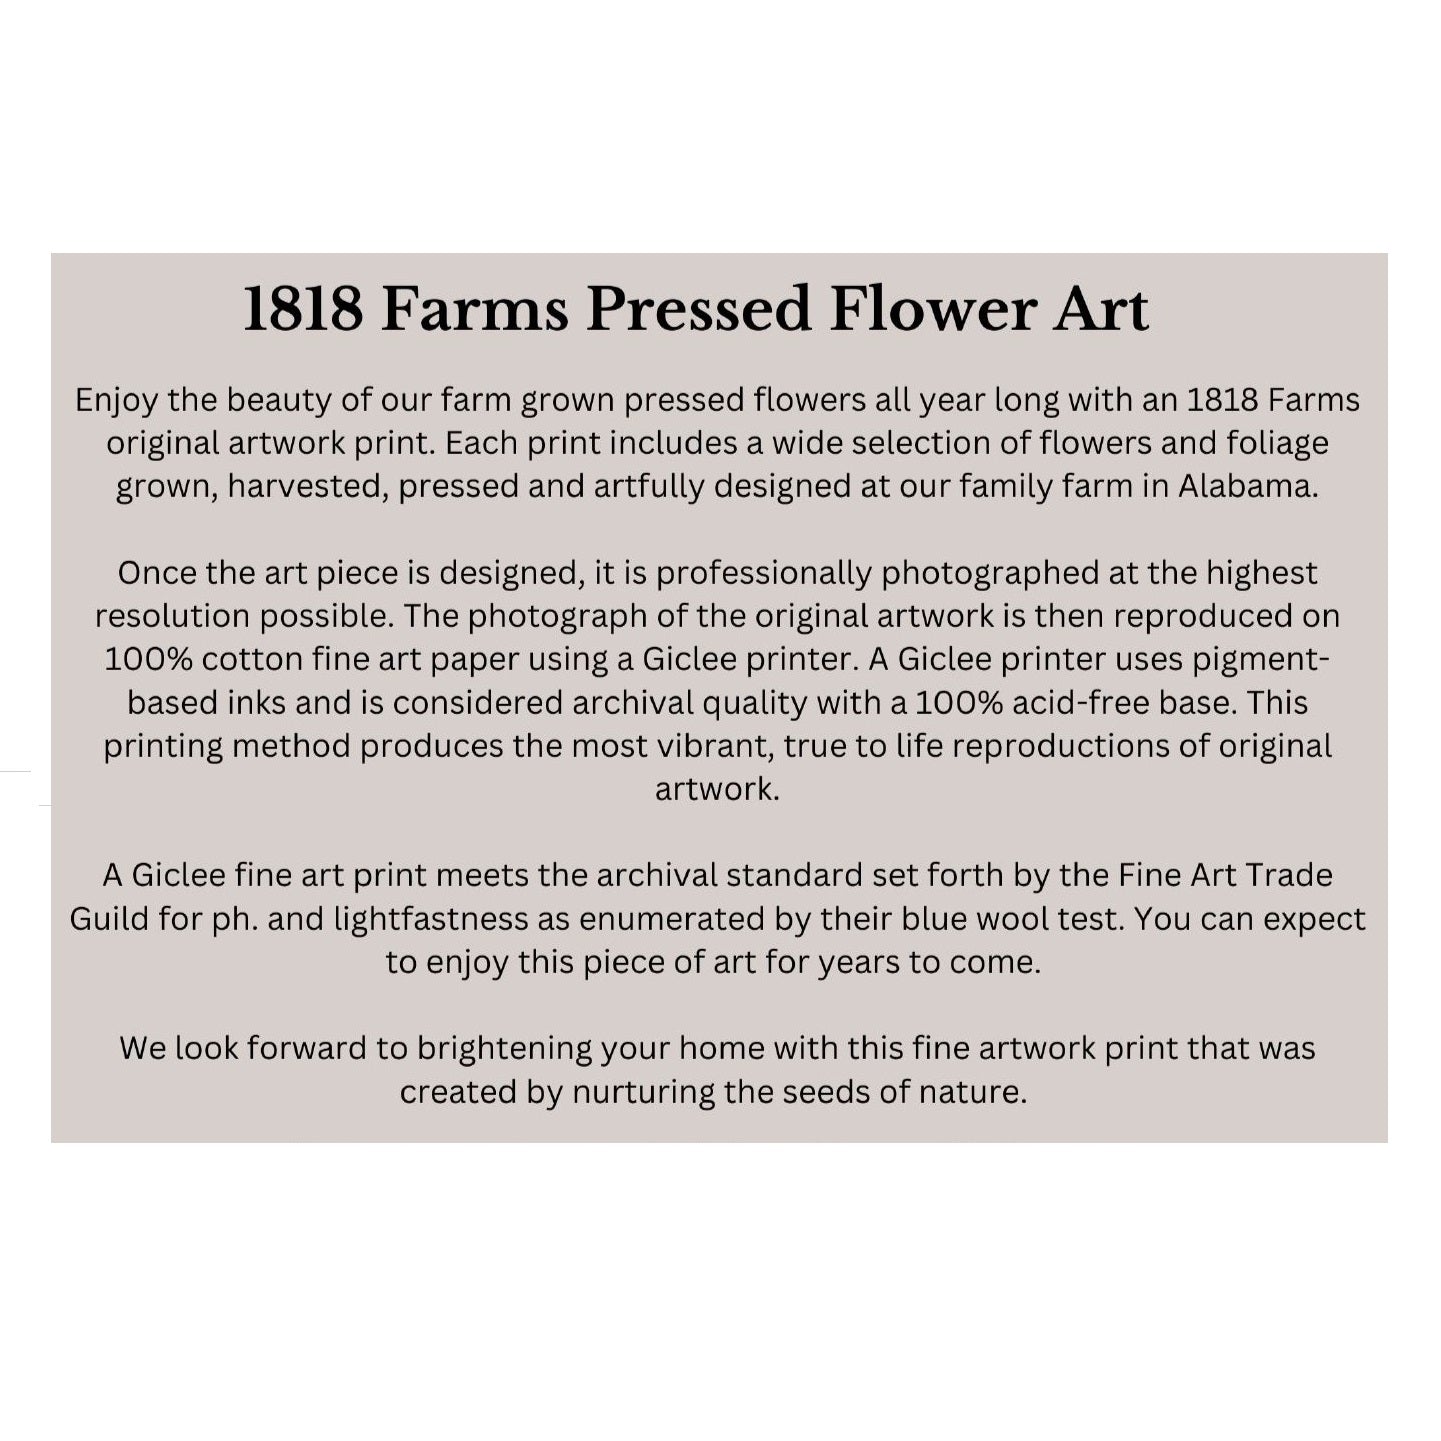 Georgia Themed Giclée Print Featuring Dried, Pressed Flowers - "Where I Bloom" Collection Giclee Art Print 1818 Farms   